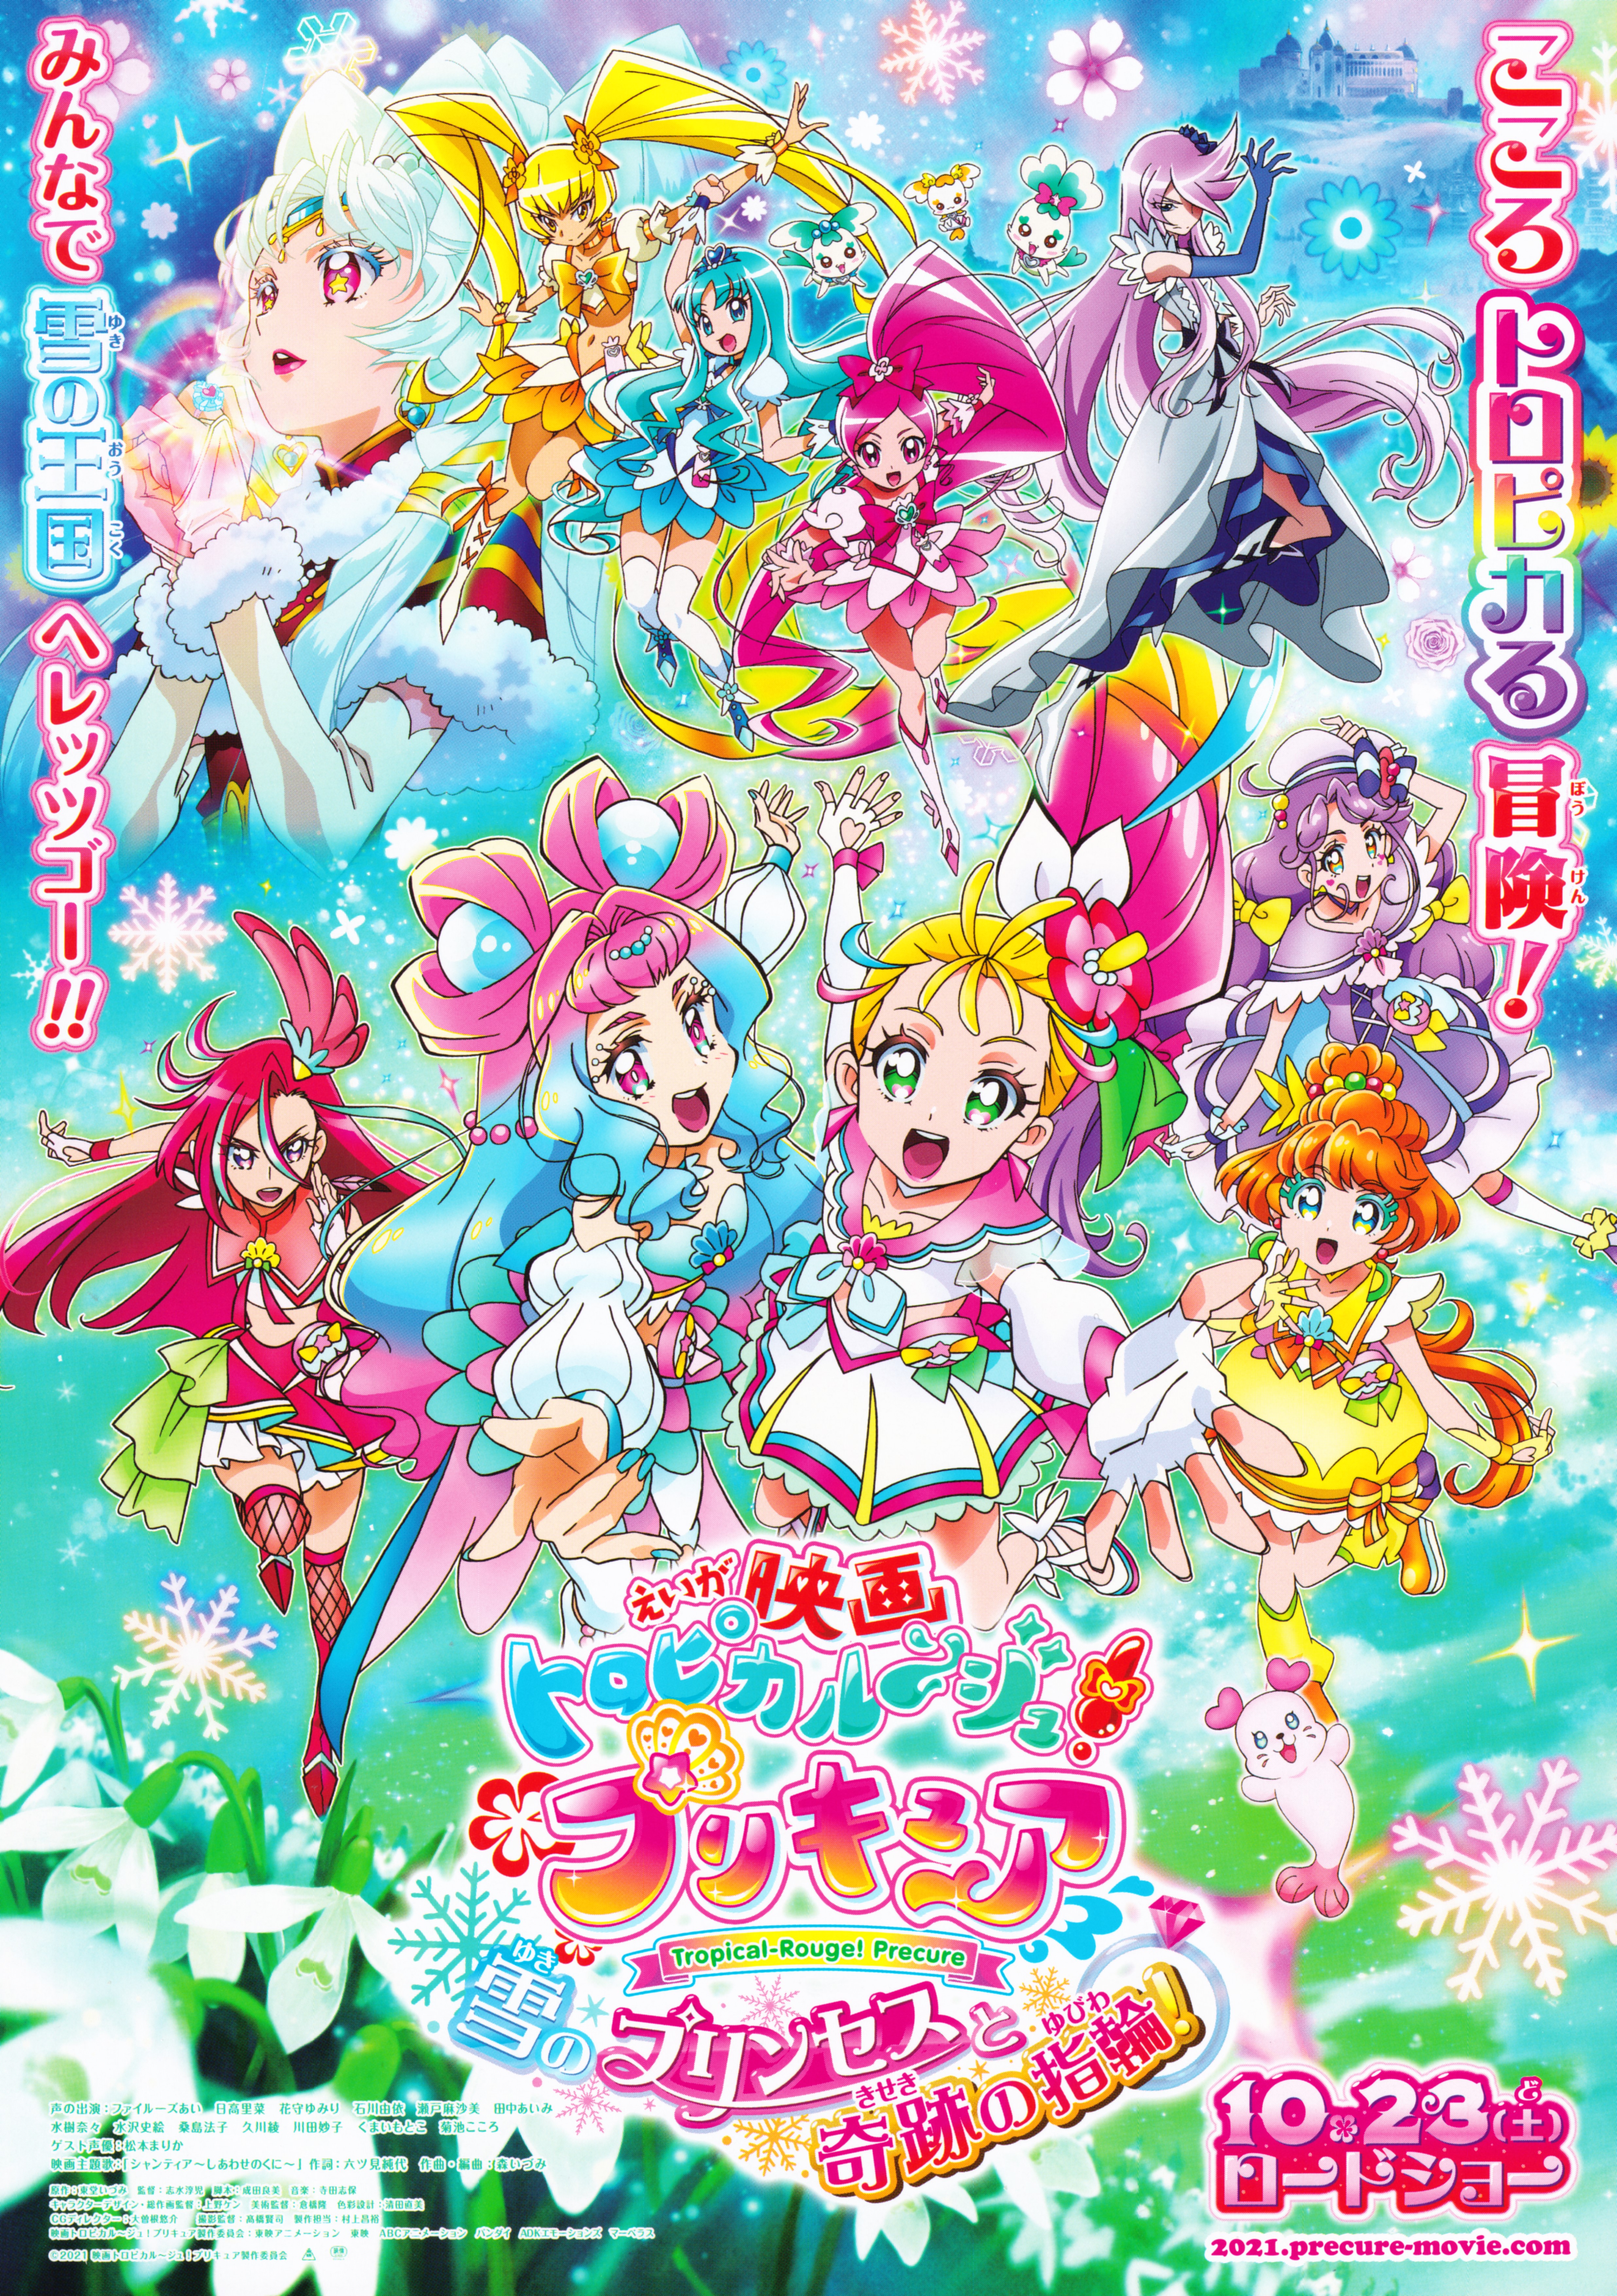 Tropical-Rouge! Pretty Cure Wallpapers